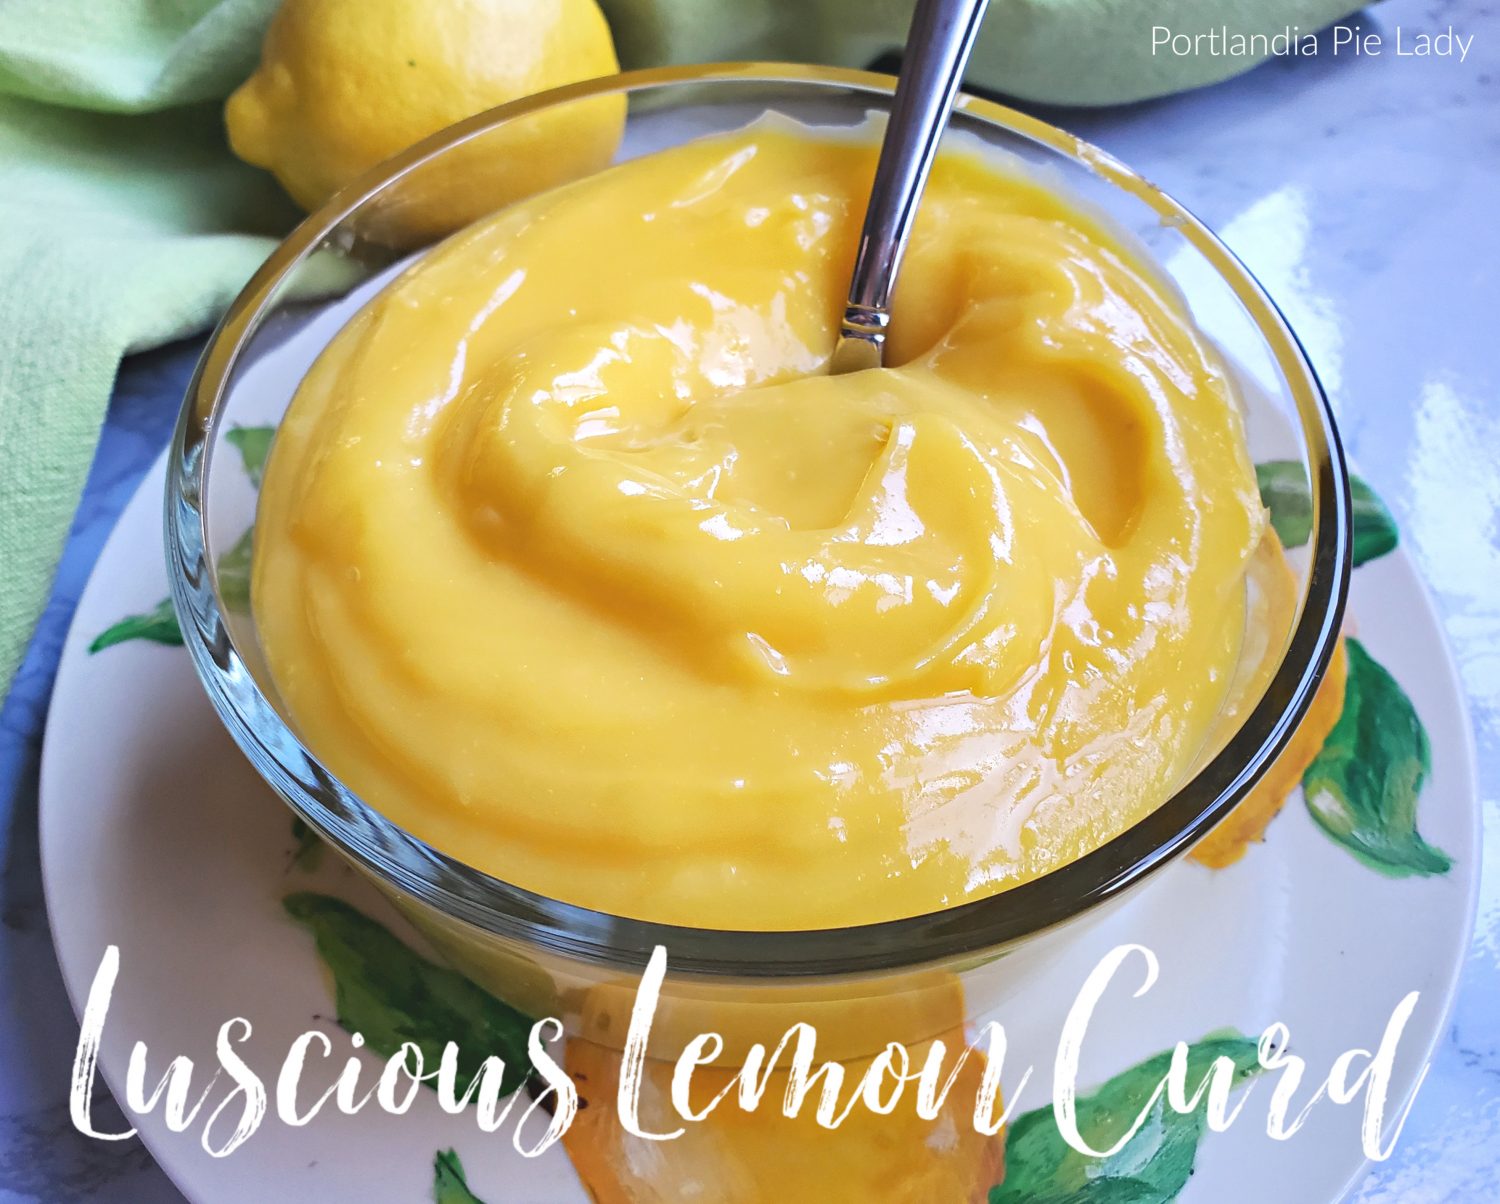 Fresh lemon juice, lemon zest with just the right amount of cream added creating a smooth and creamy melt in your mouth lemon curd.